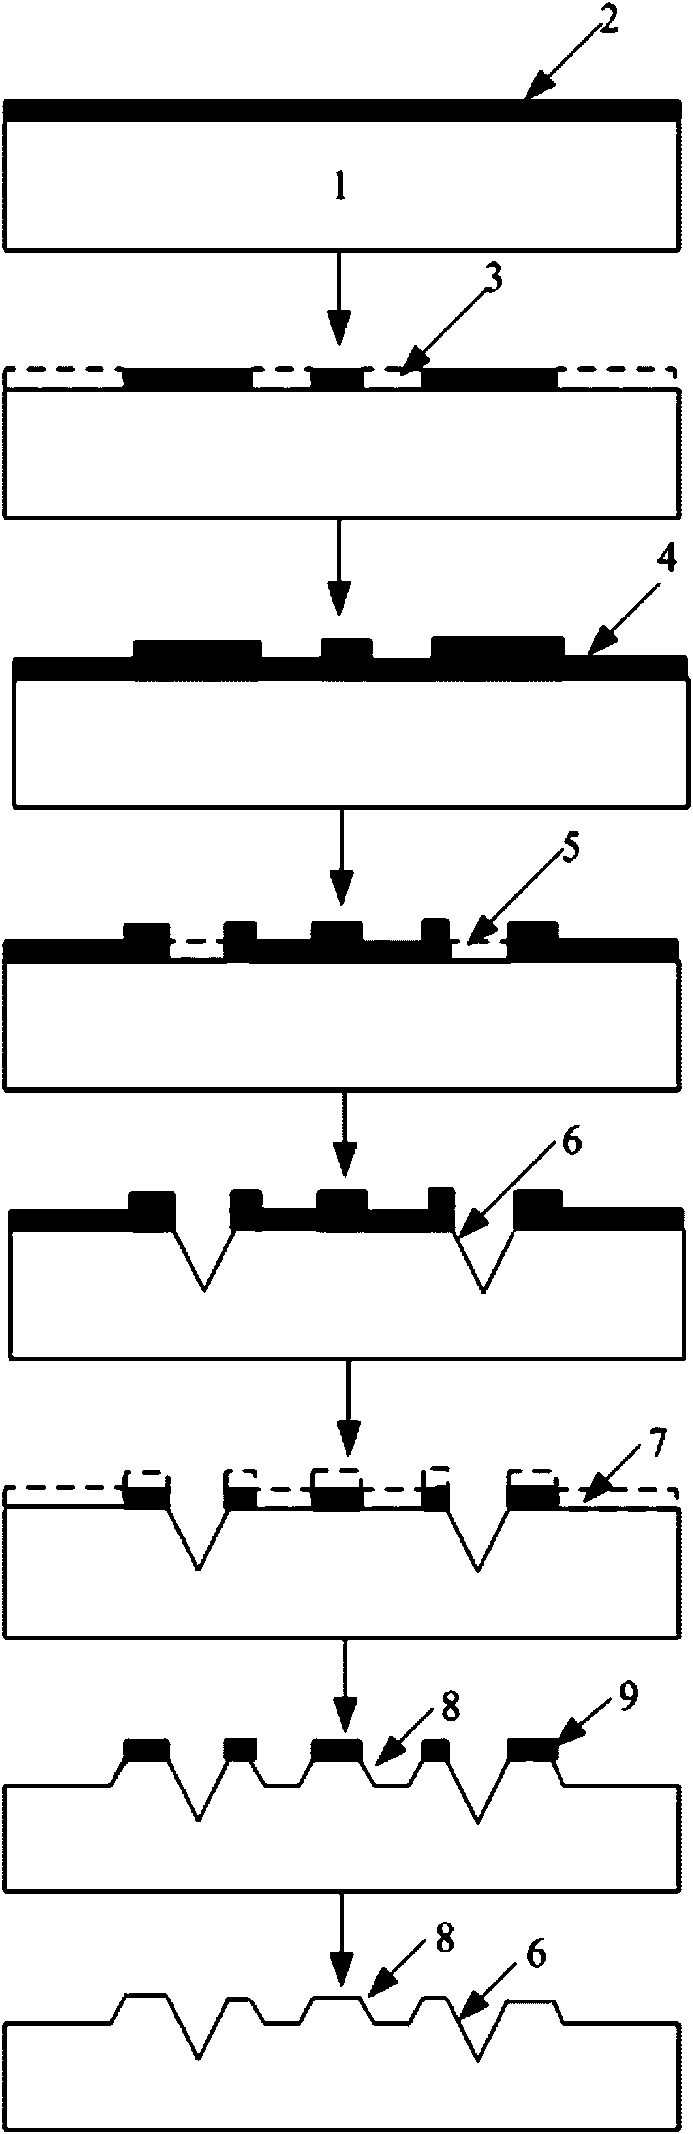 Bulk-silicon processing method for manufacturing microstructure on basis of multiple masking layers